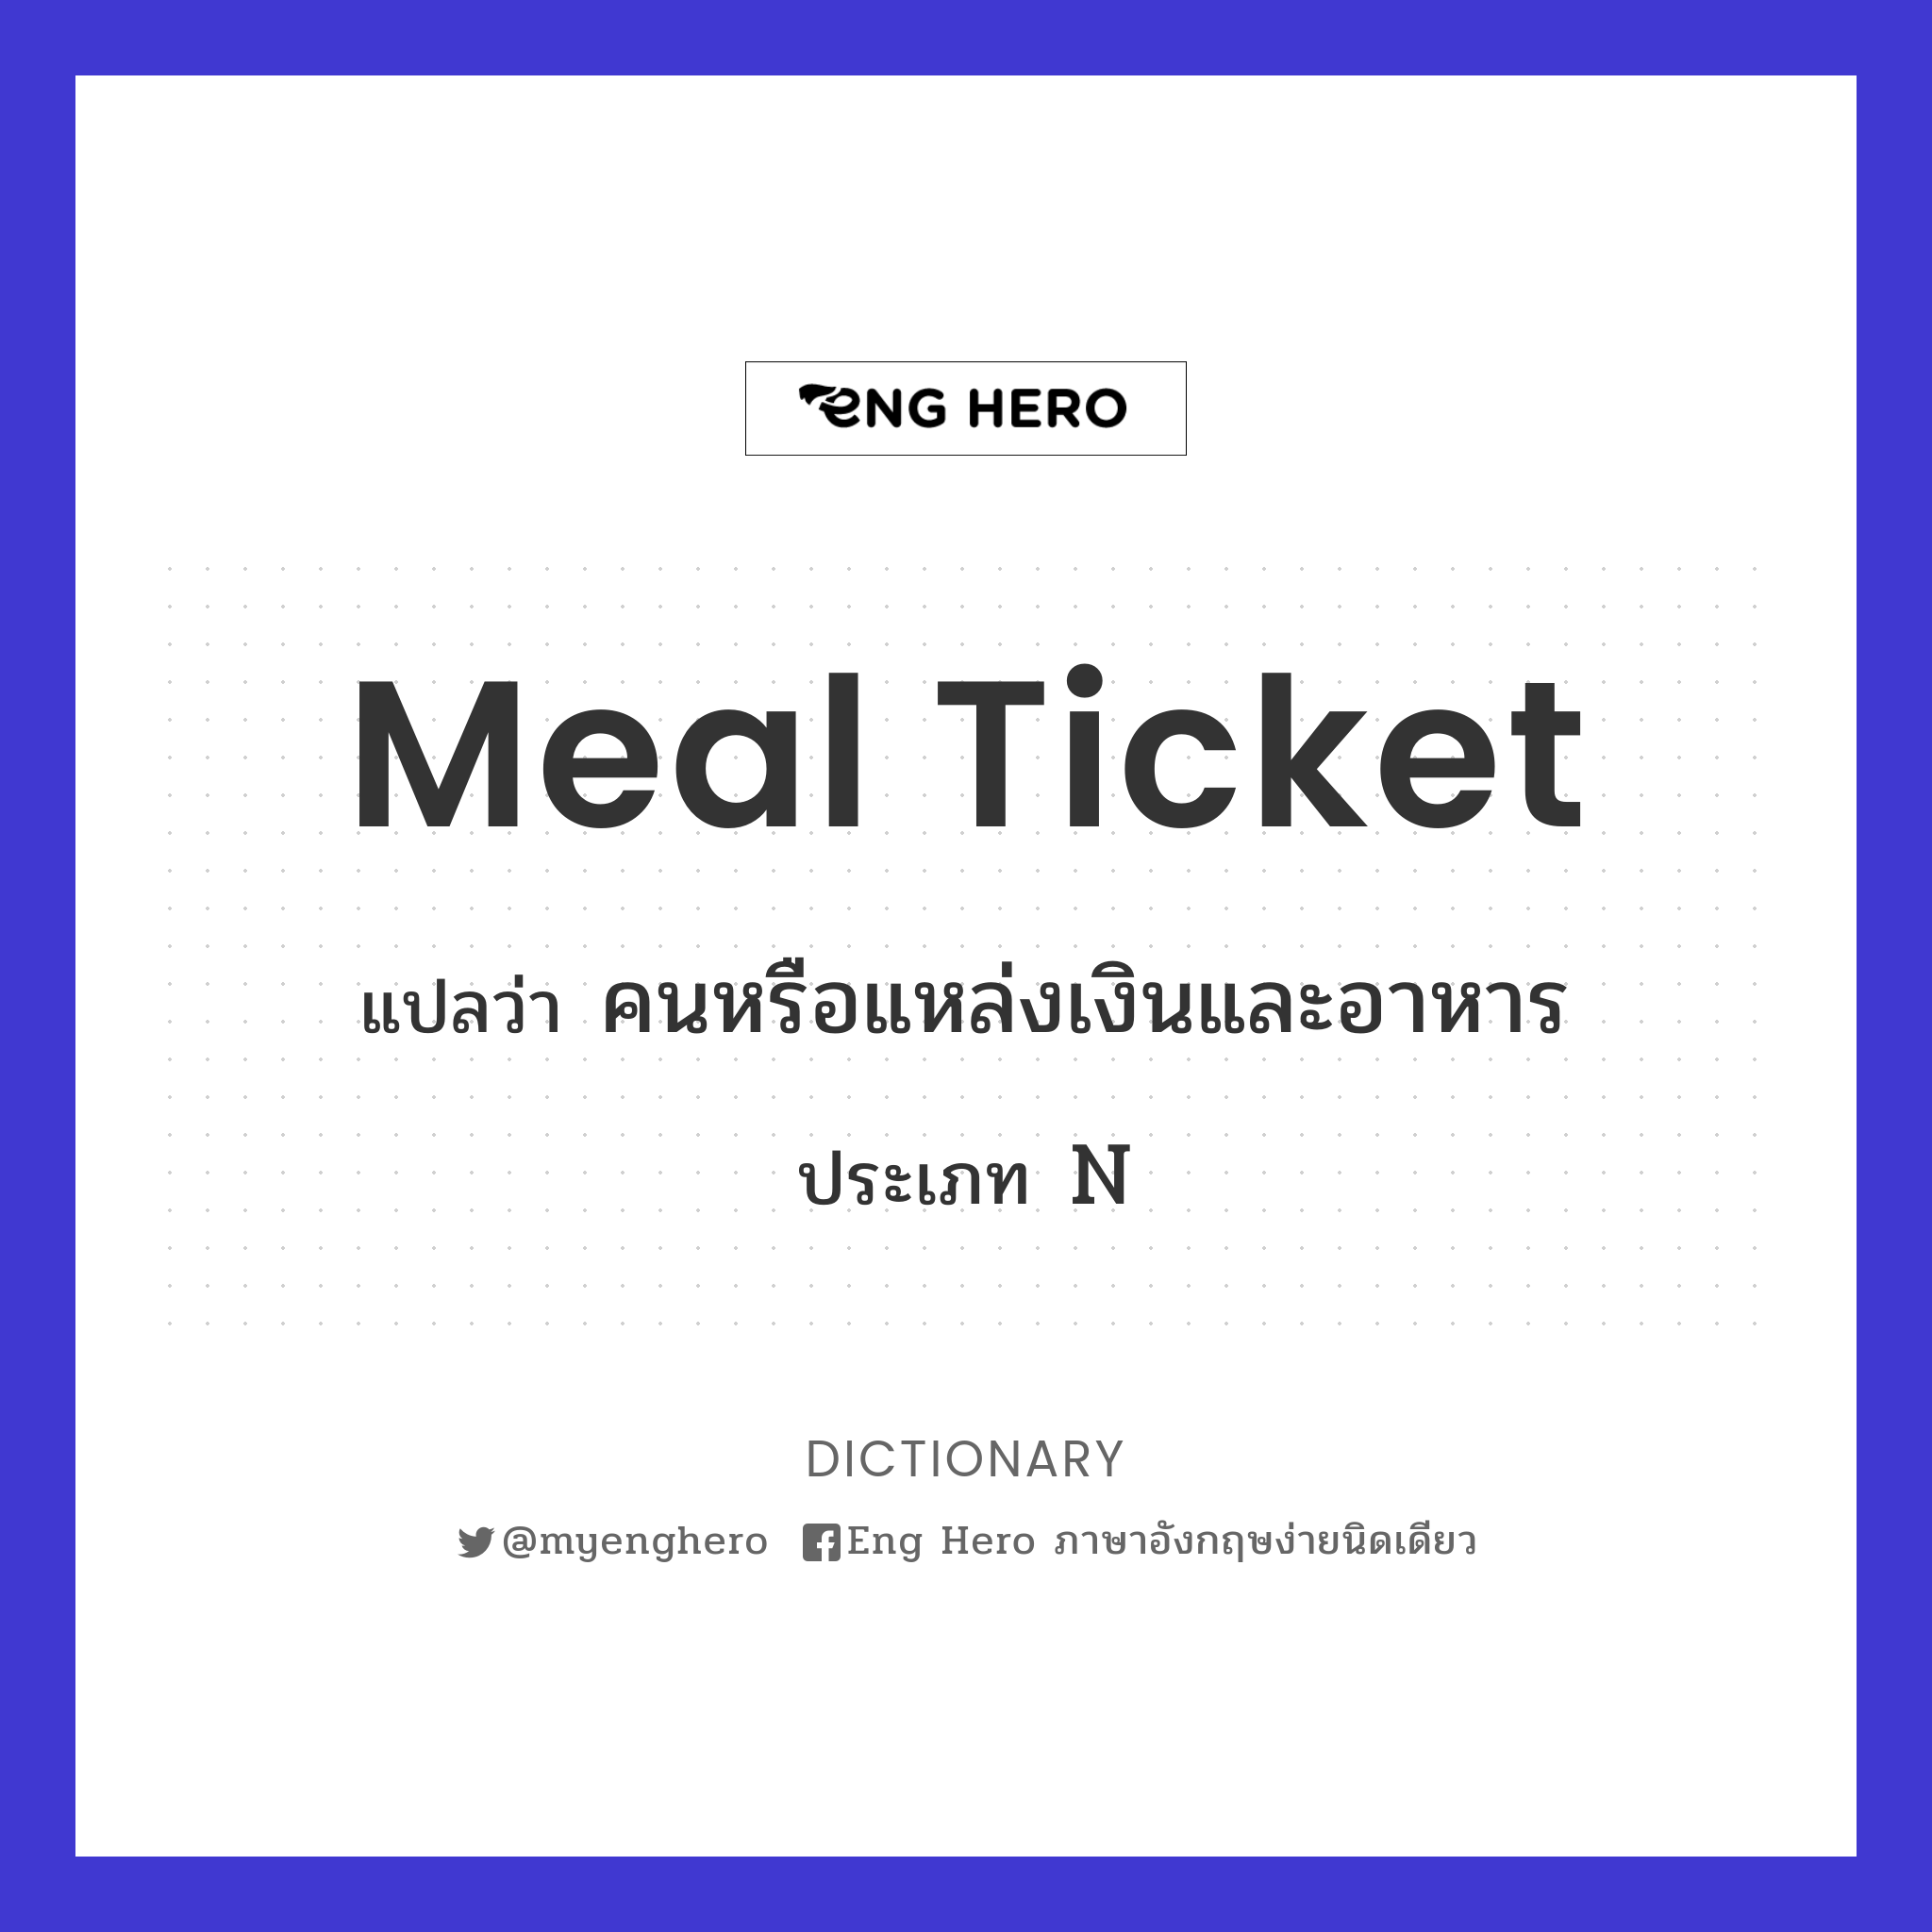 meal ticket